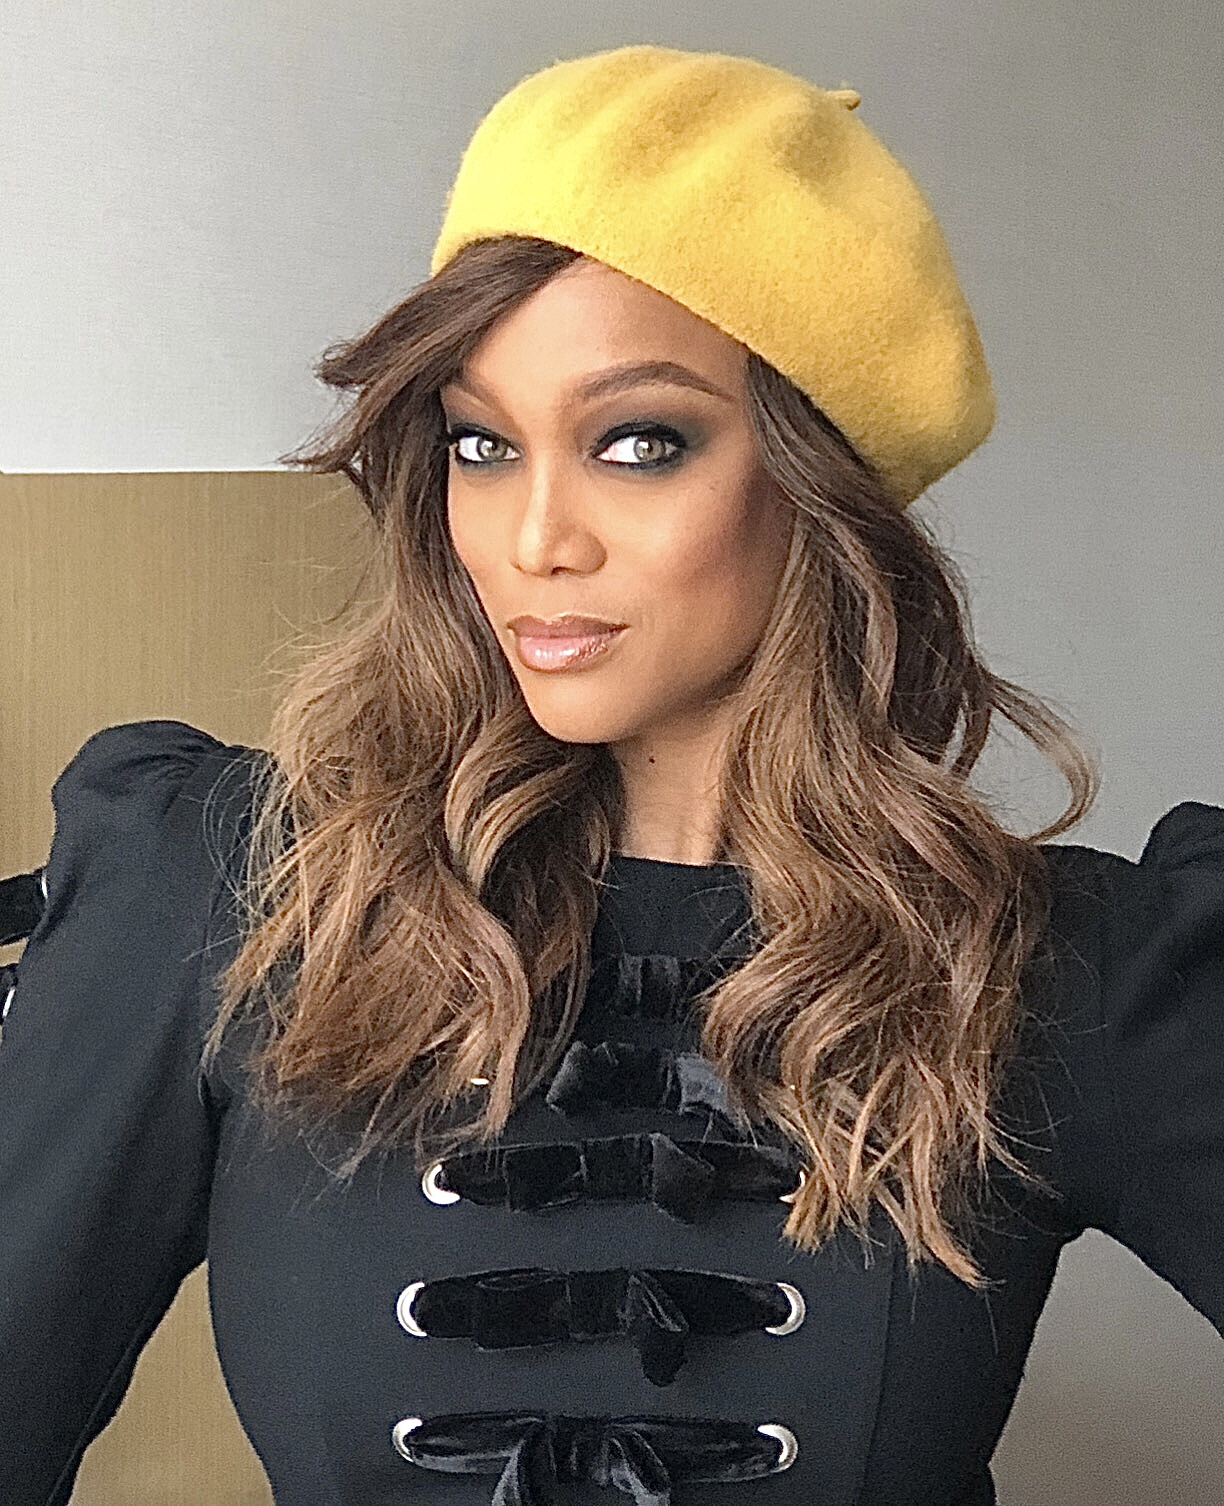 Texas Women’s Empowerment Foundation Hosts International Women’s Leadership Summit with  Special Guest Tyra Banks, Harris, Texas, United States